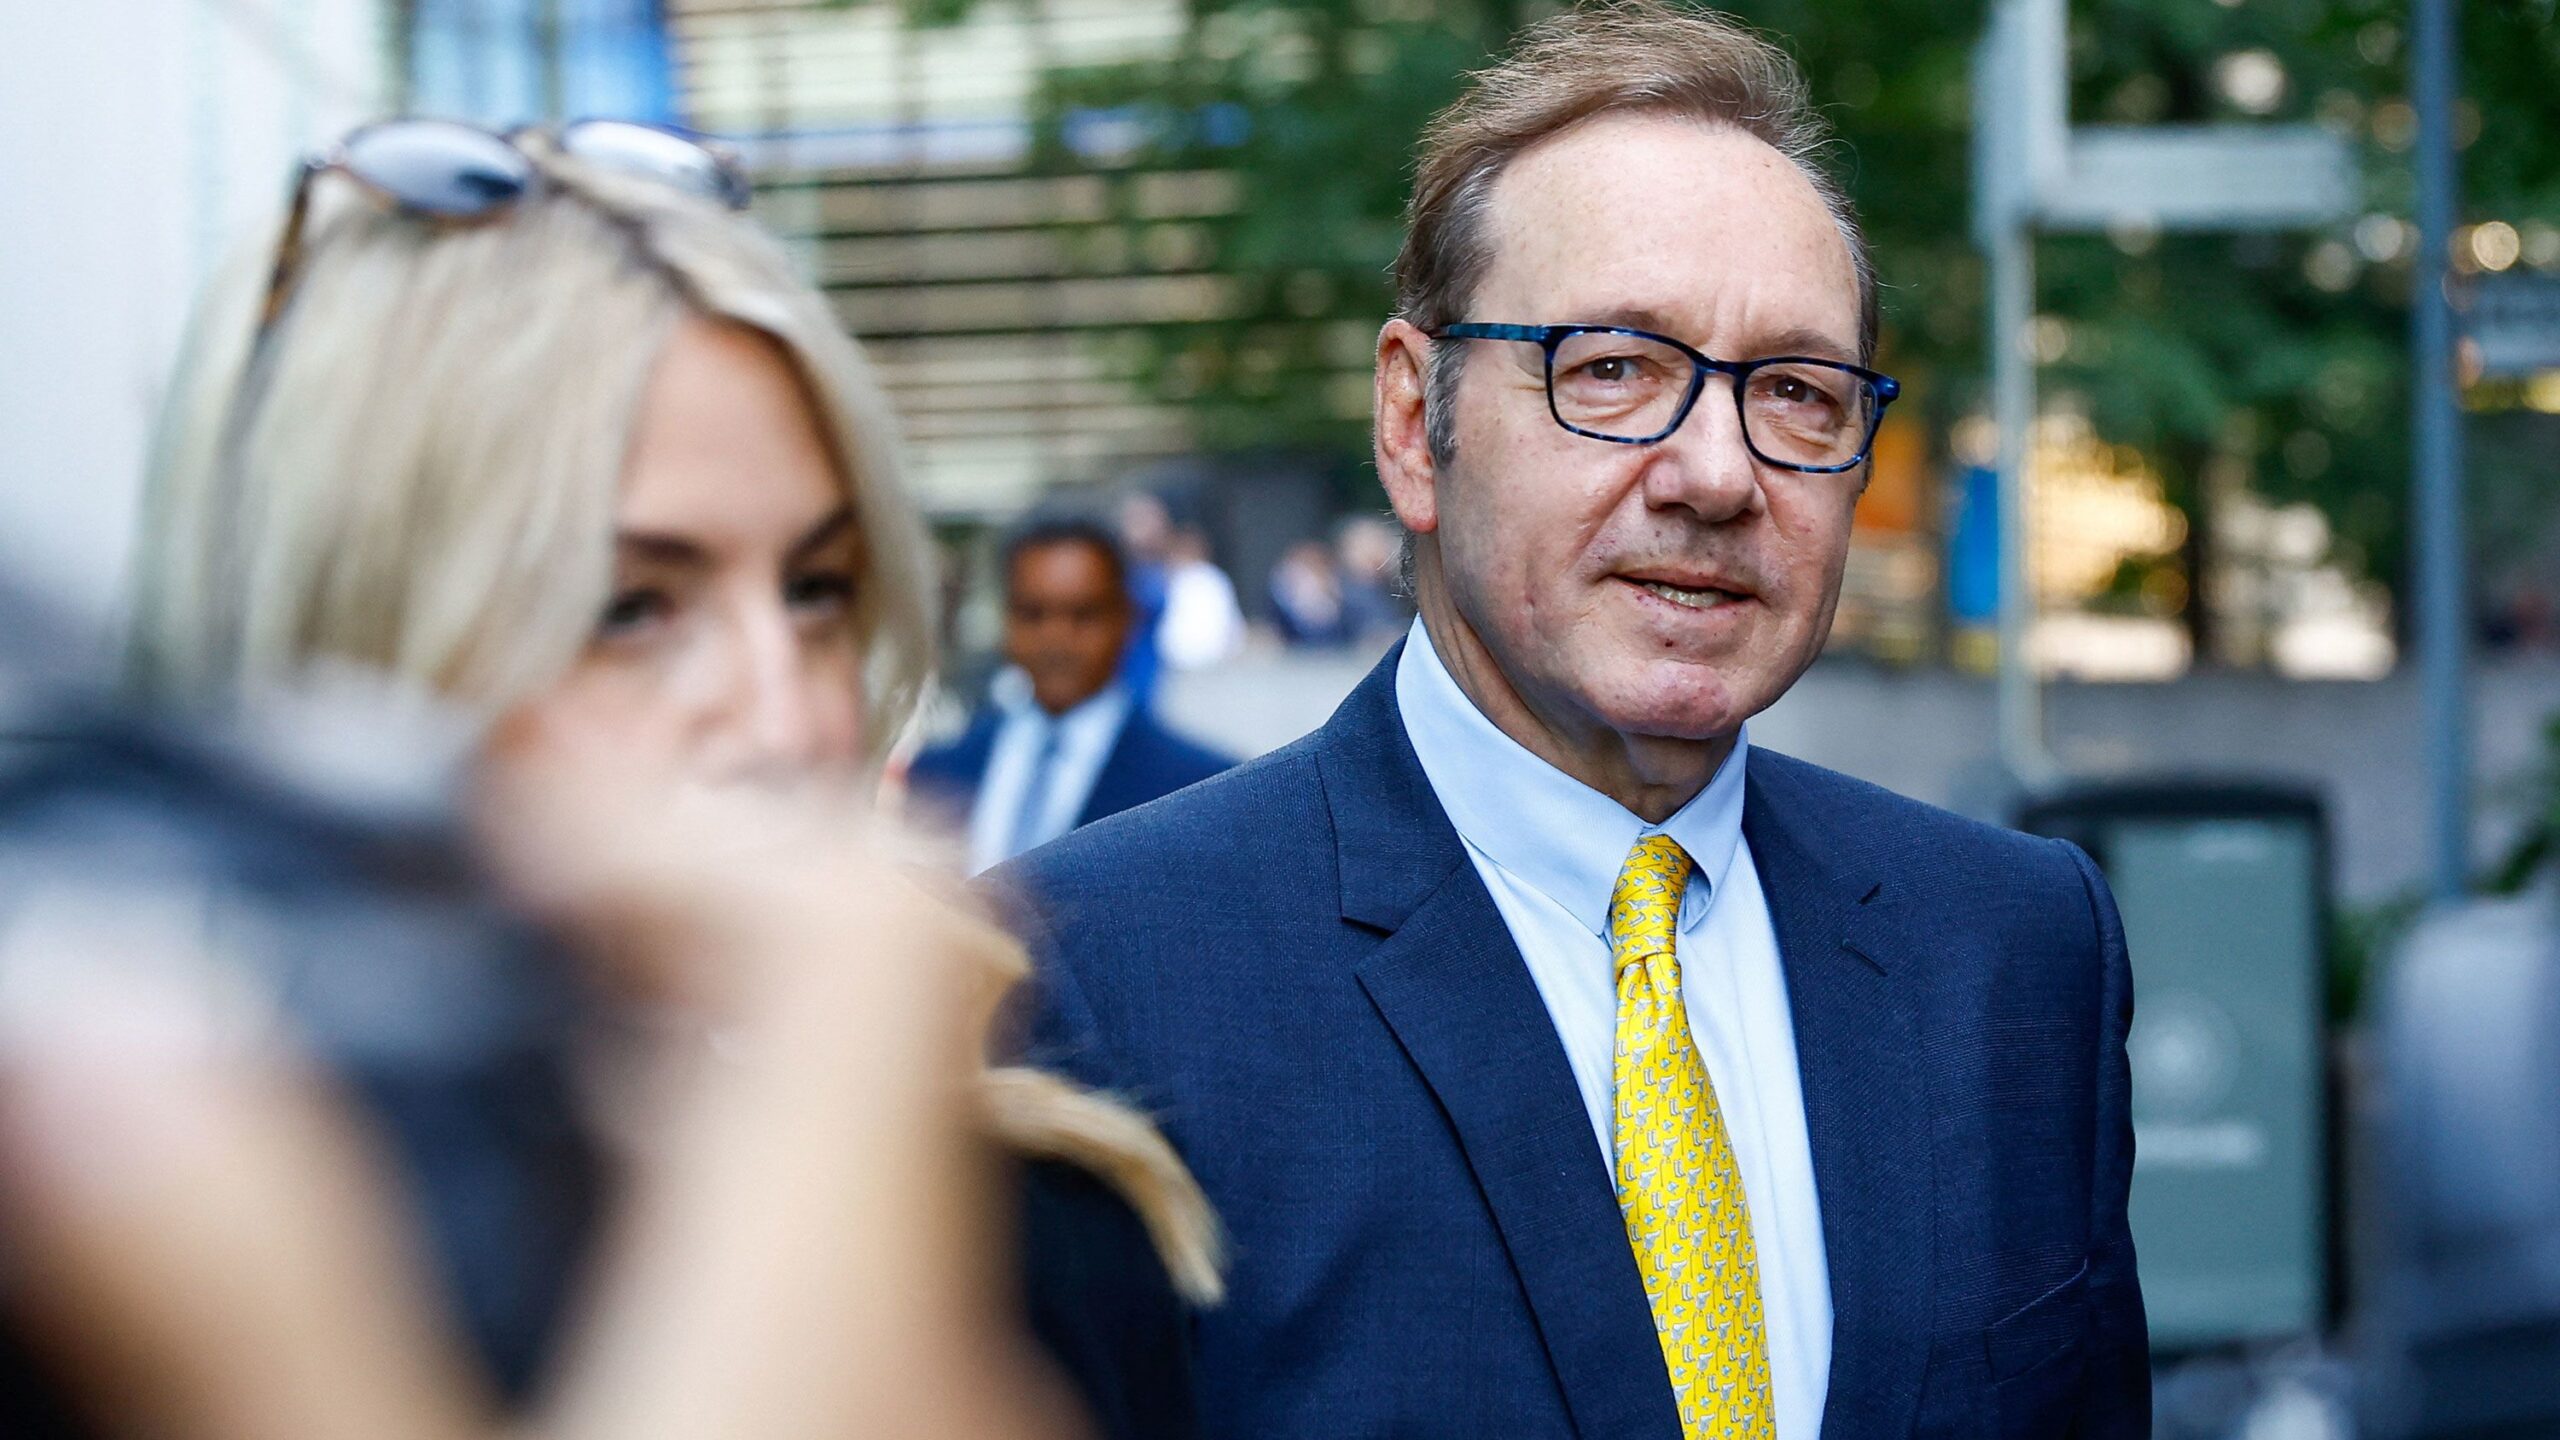 Actor Kevin Spacey outside London's Southwark Crown Court on July 25.
(Photo: Peter Cziborra/Reuter...